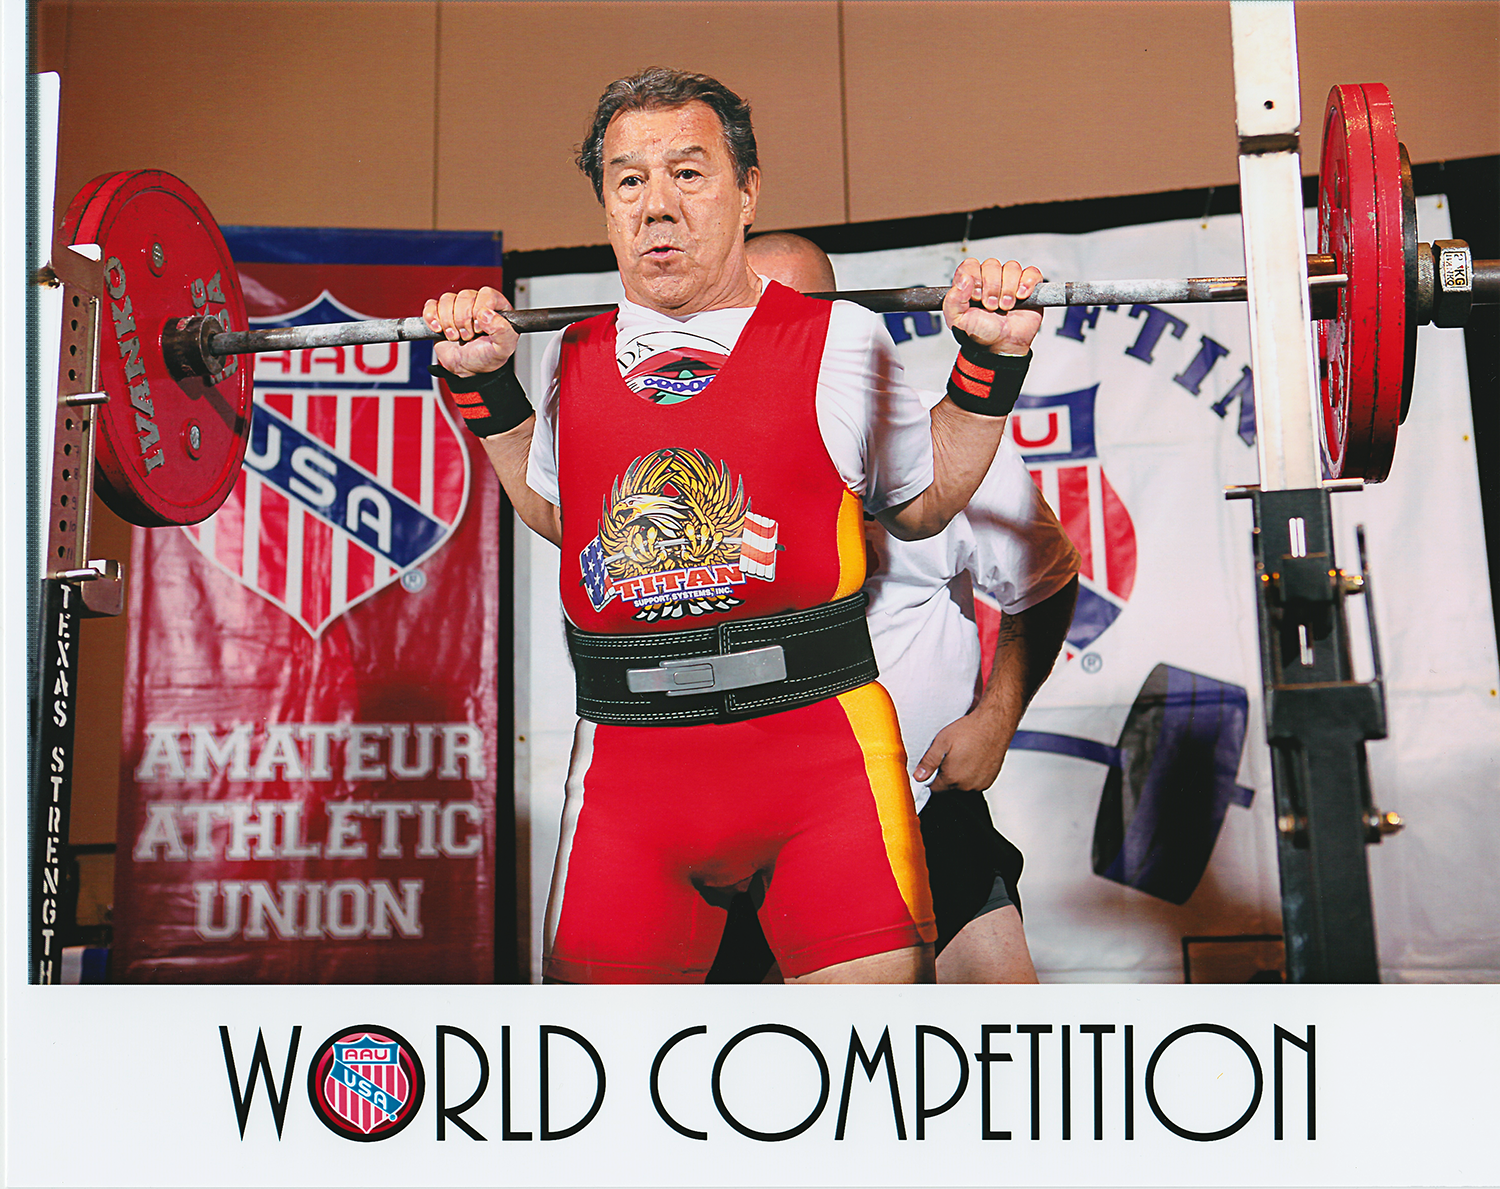 Ray Fougnier, Who Started Powerlifting at 70 Is Setting Records